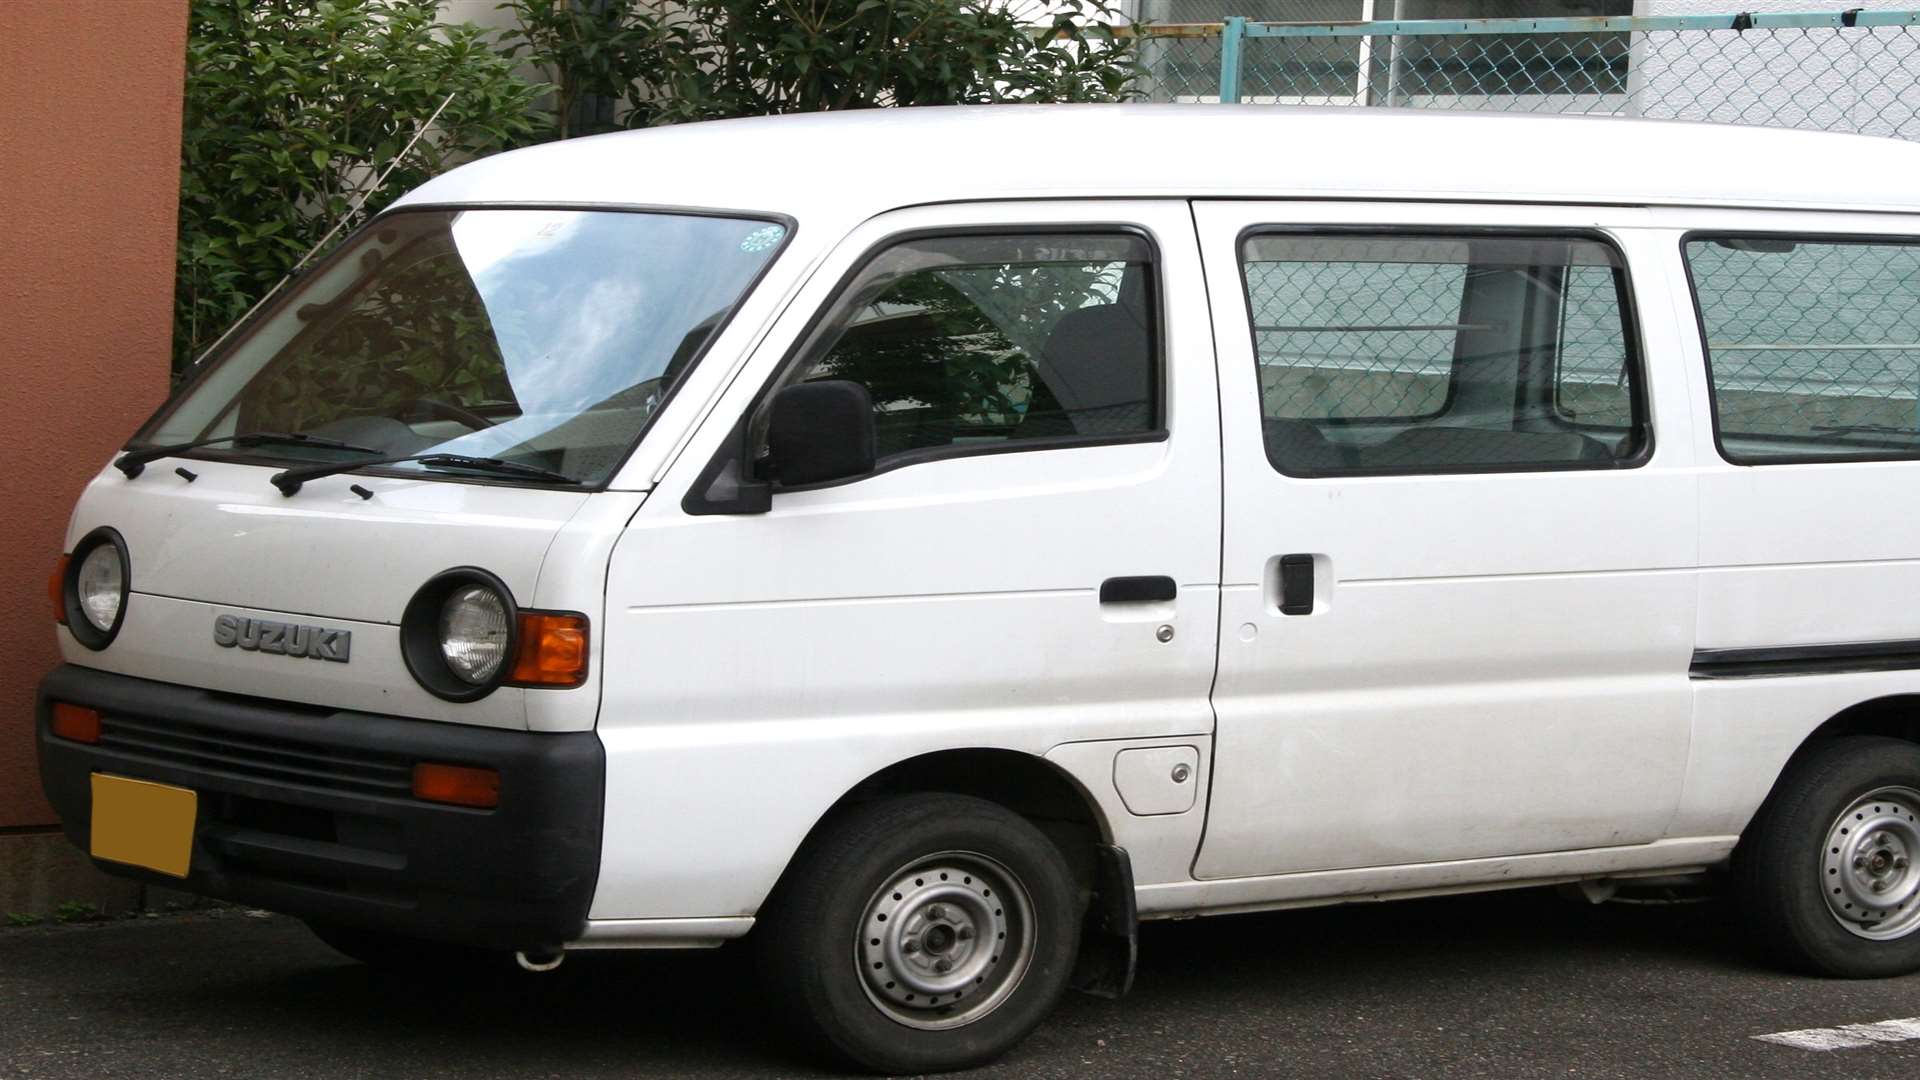 A carry-style van. Stock image